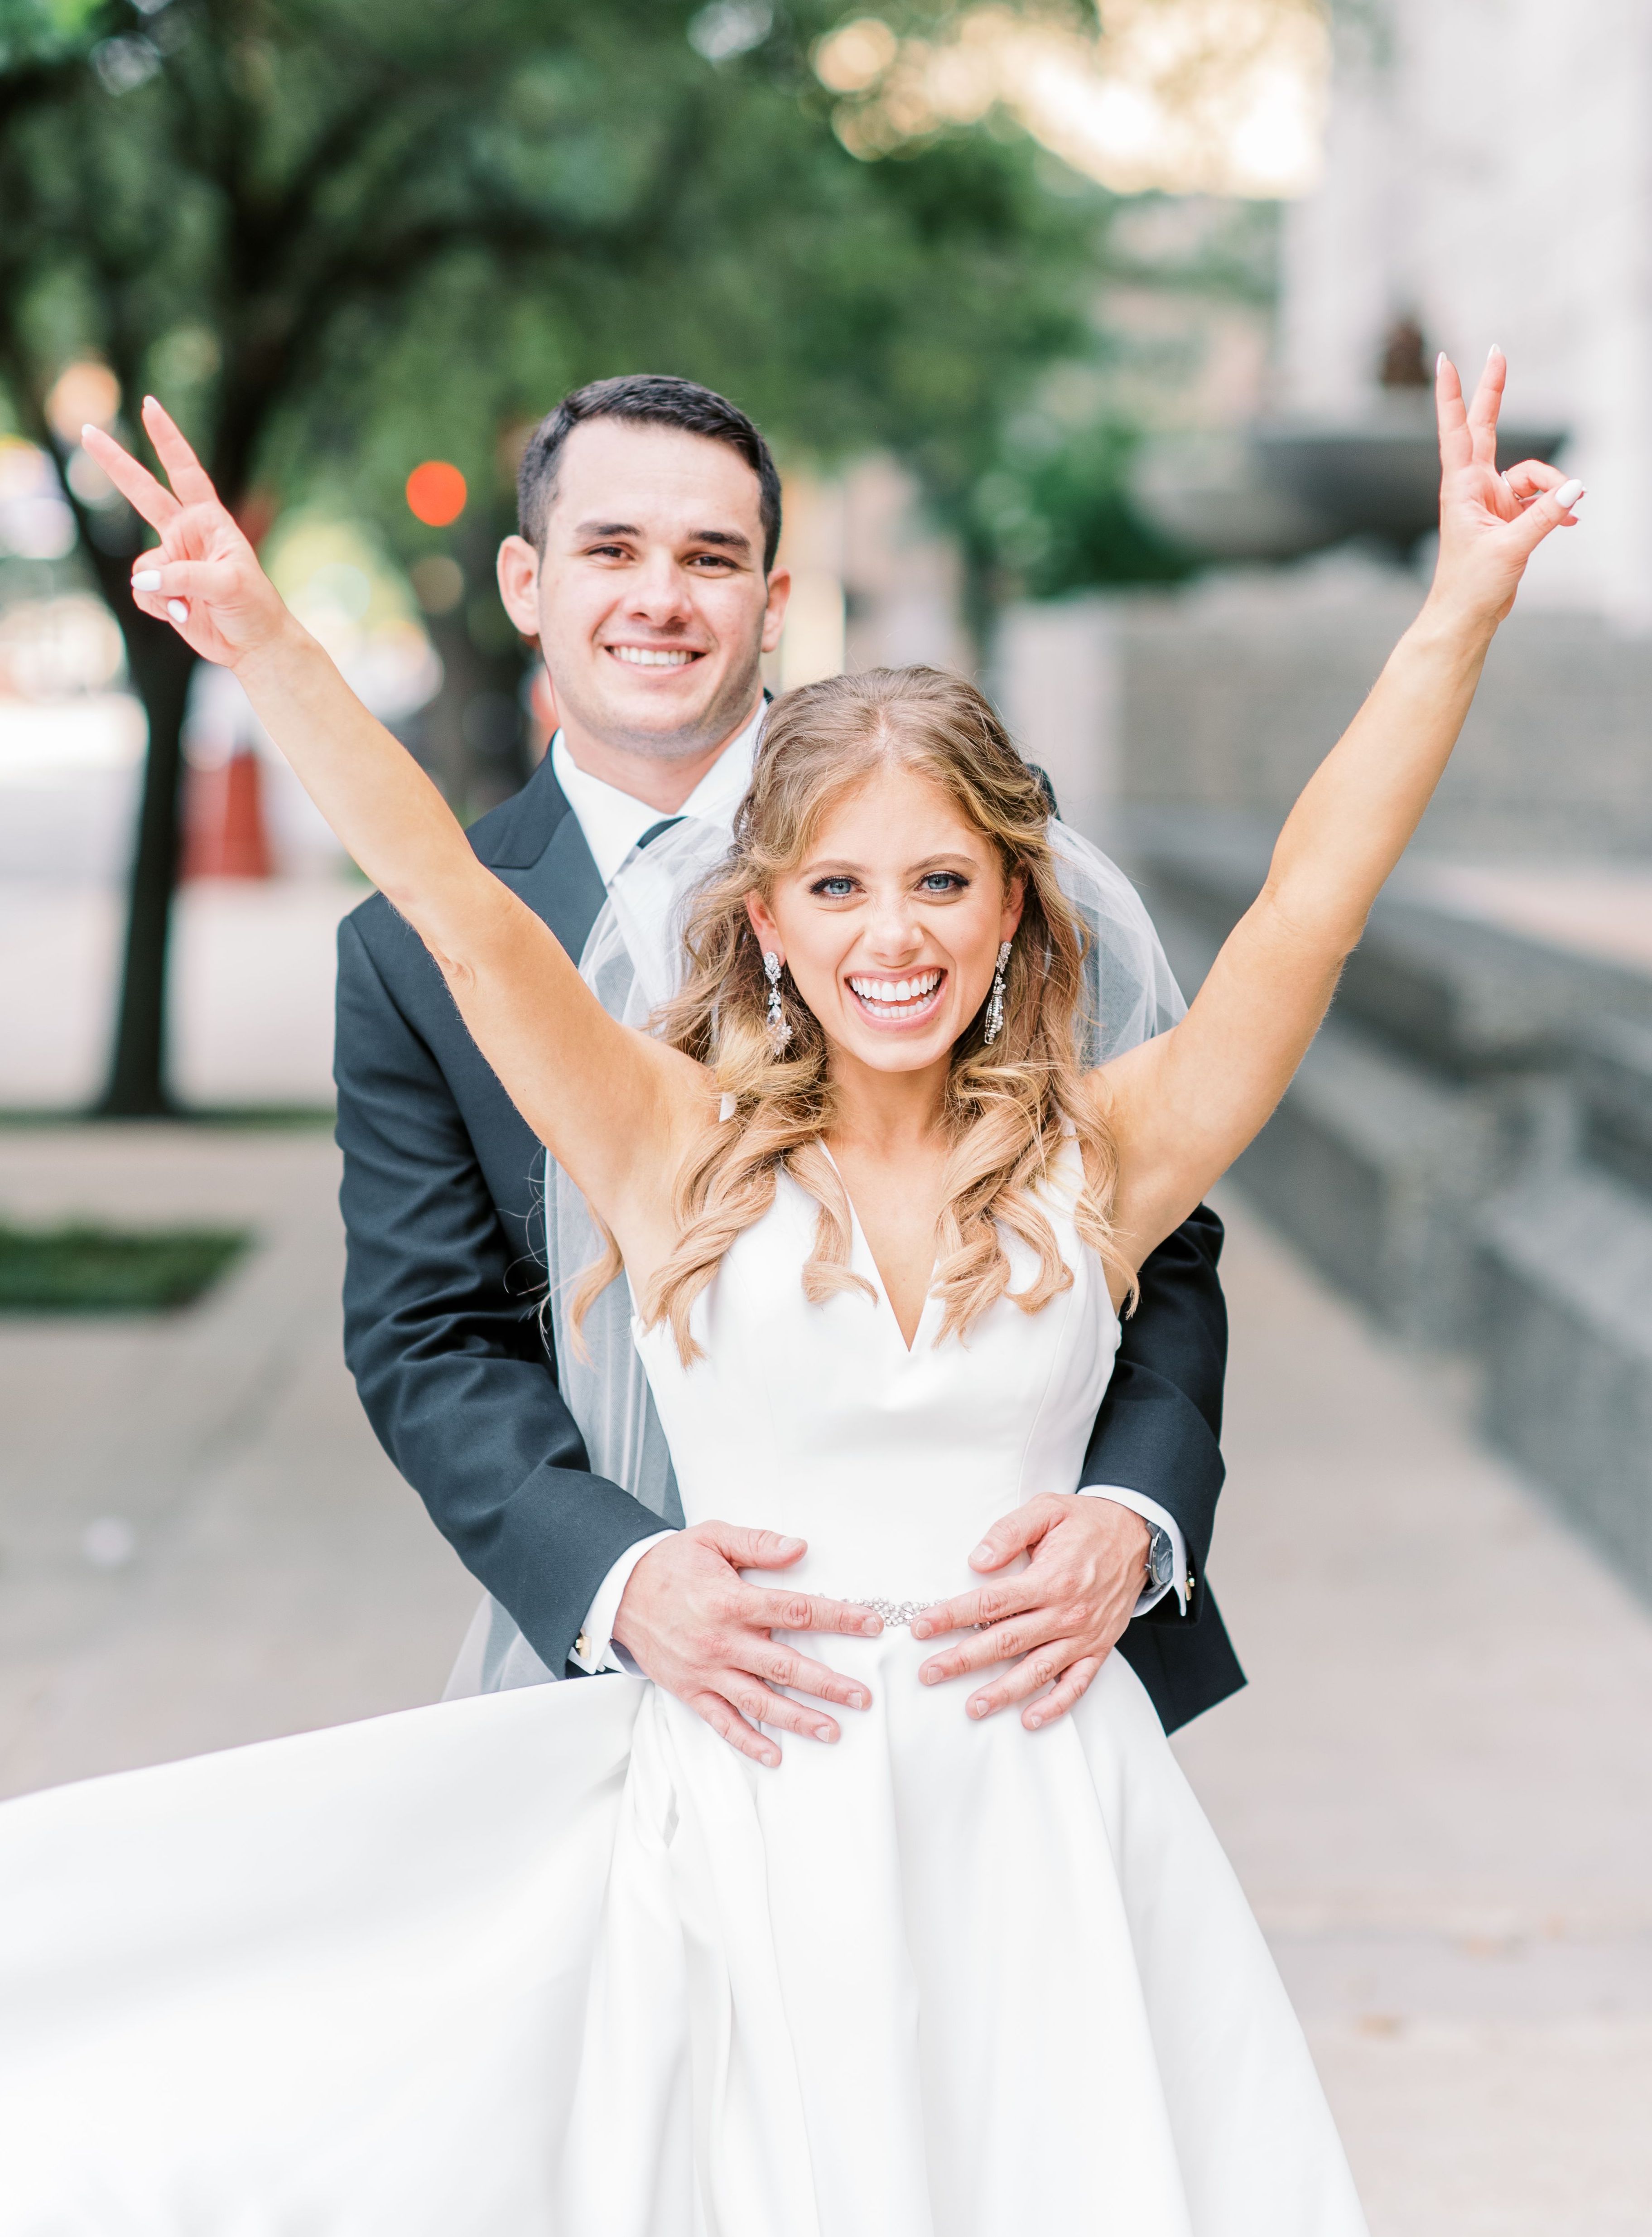 Bride holding up peace signs with her hands and smiling as the groom holds her waist.